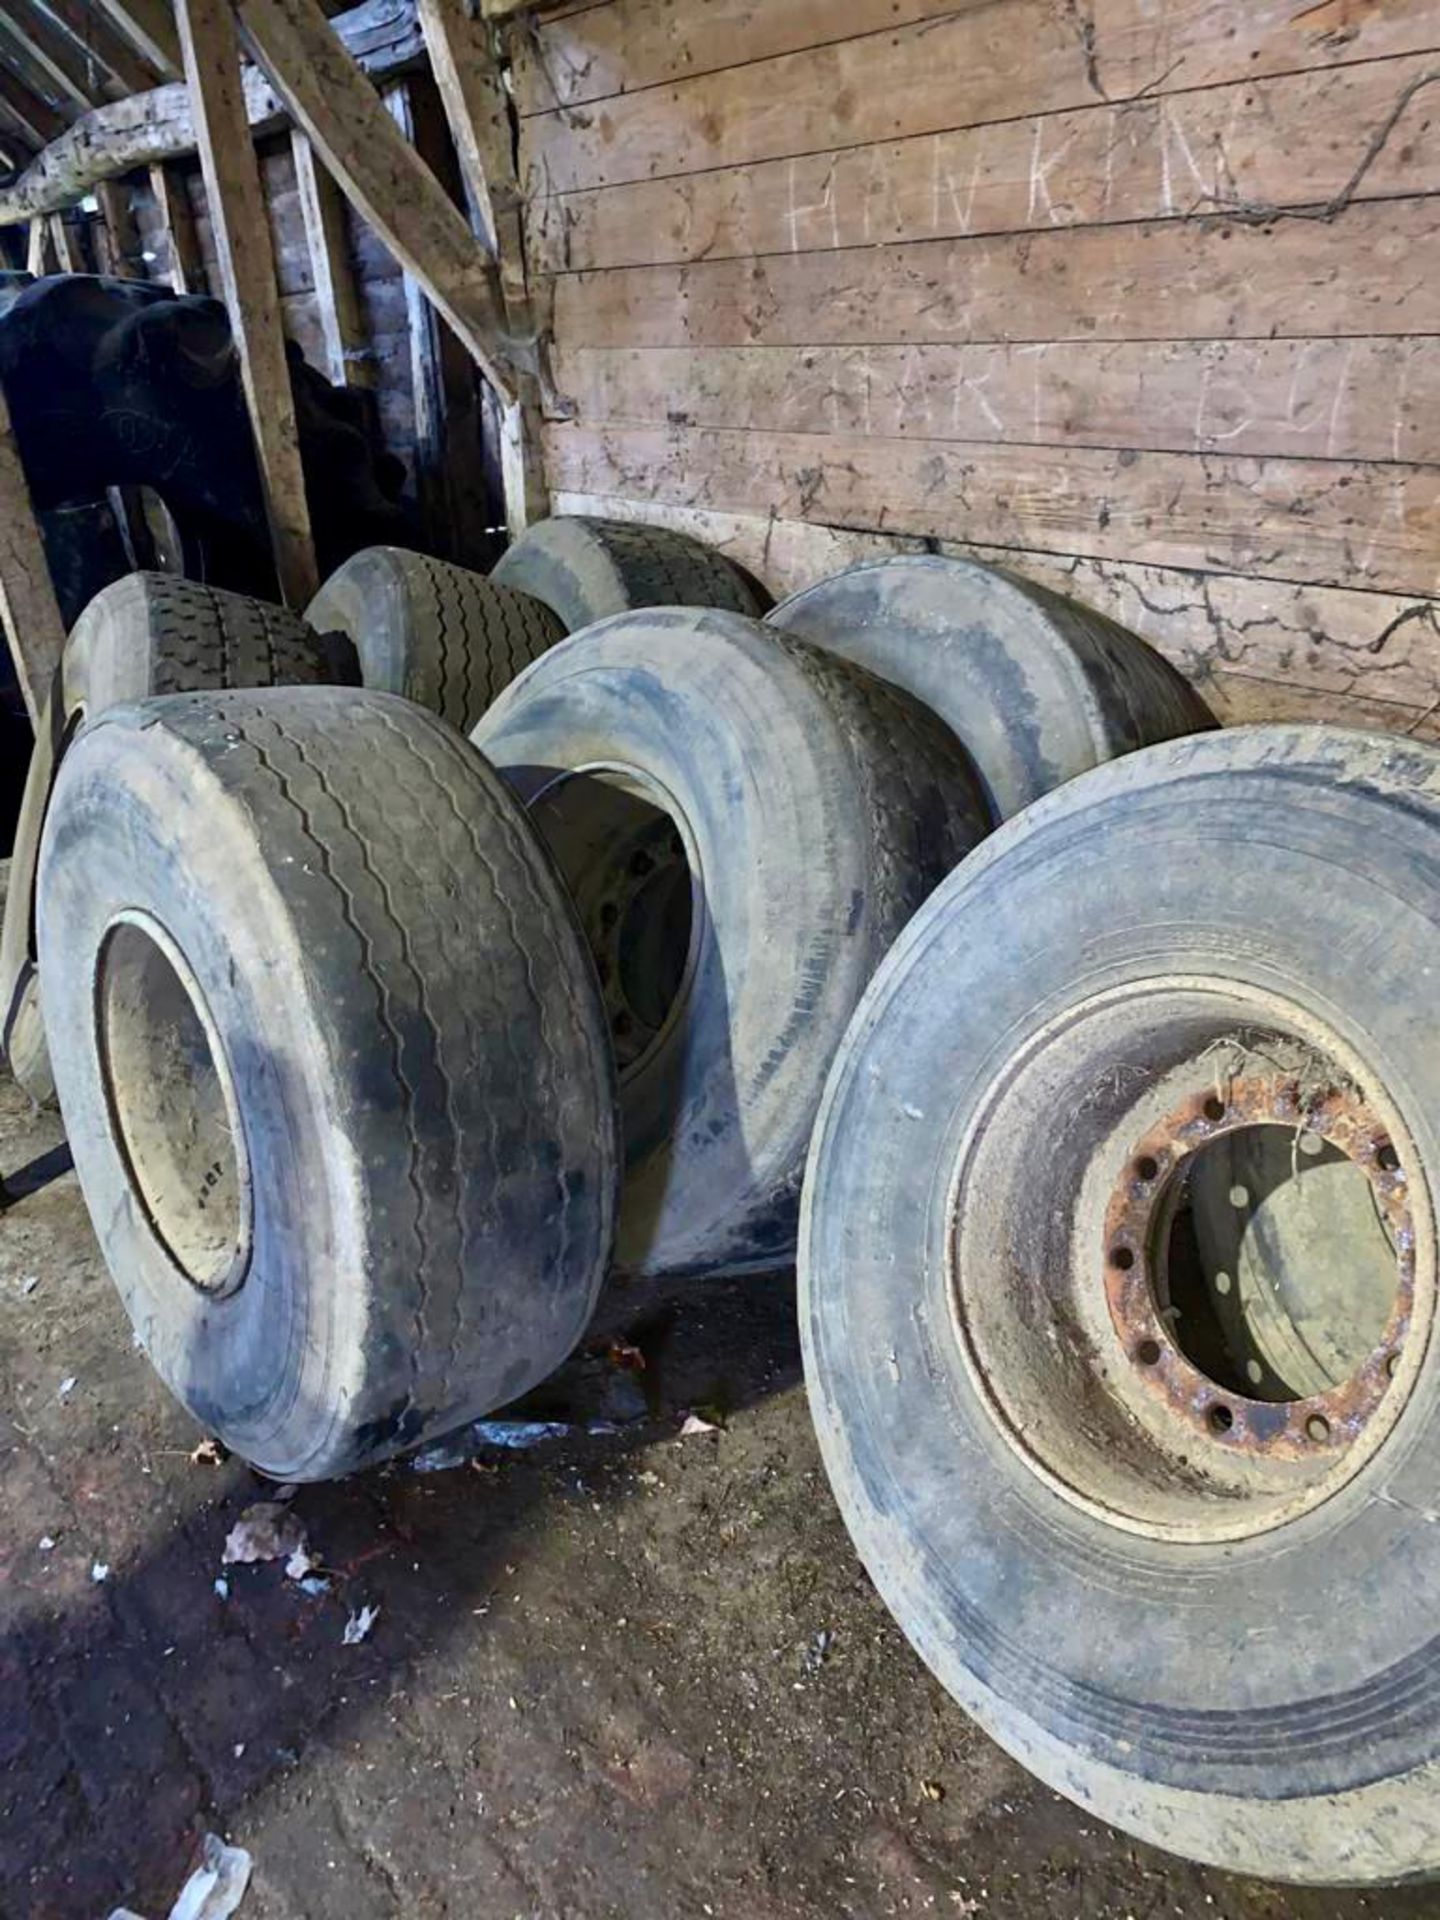 8 x 18R19.5 Tyres and Wheels - were previously on trailers. Stored near Chatteris, Cambridgeshire.